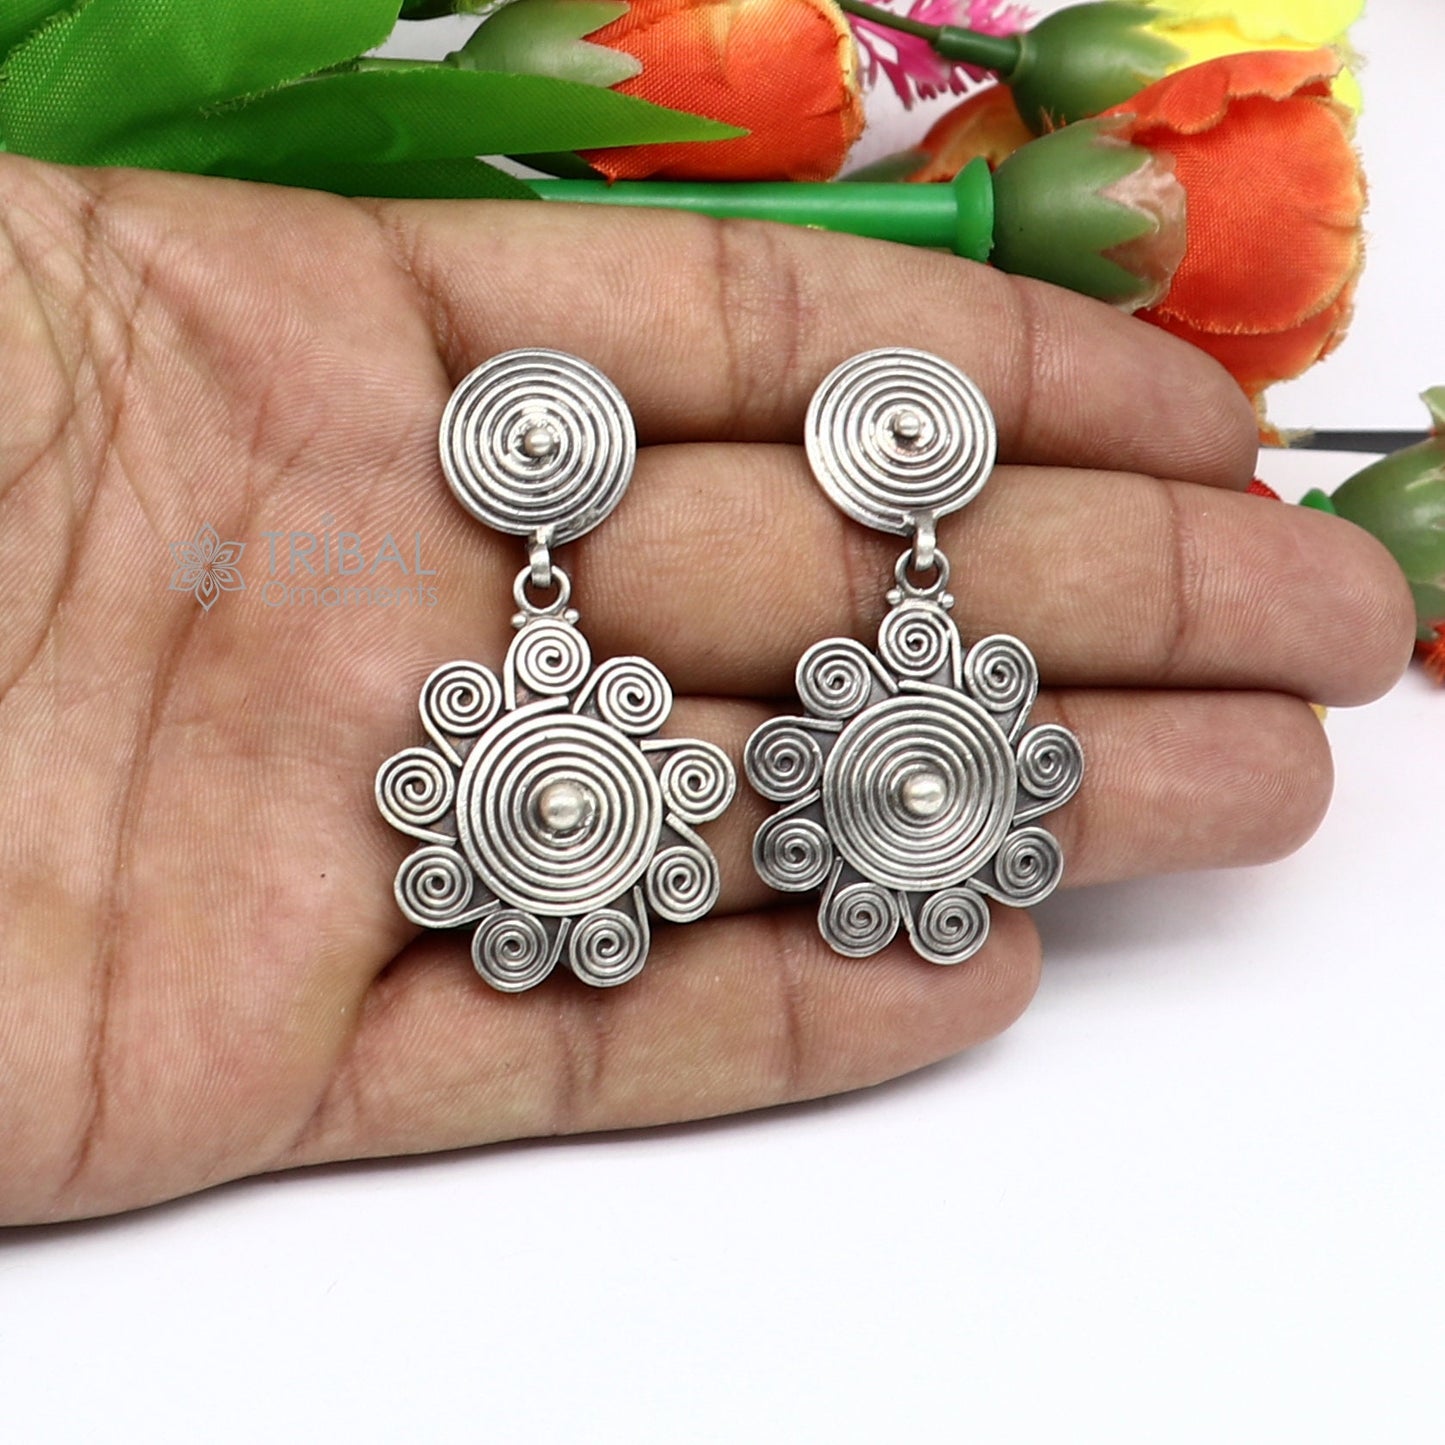 925 sterling silver handcrafted earring, stud earring, amazing Stylish design functional party wear gifting earring wedding jewelry s1230 - TRIBAL ORNAMENTS